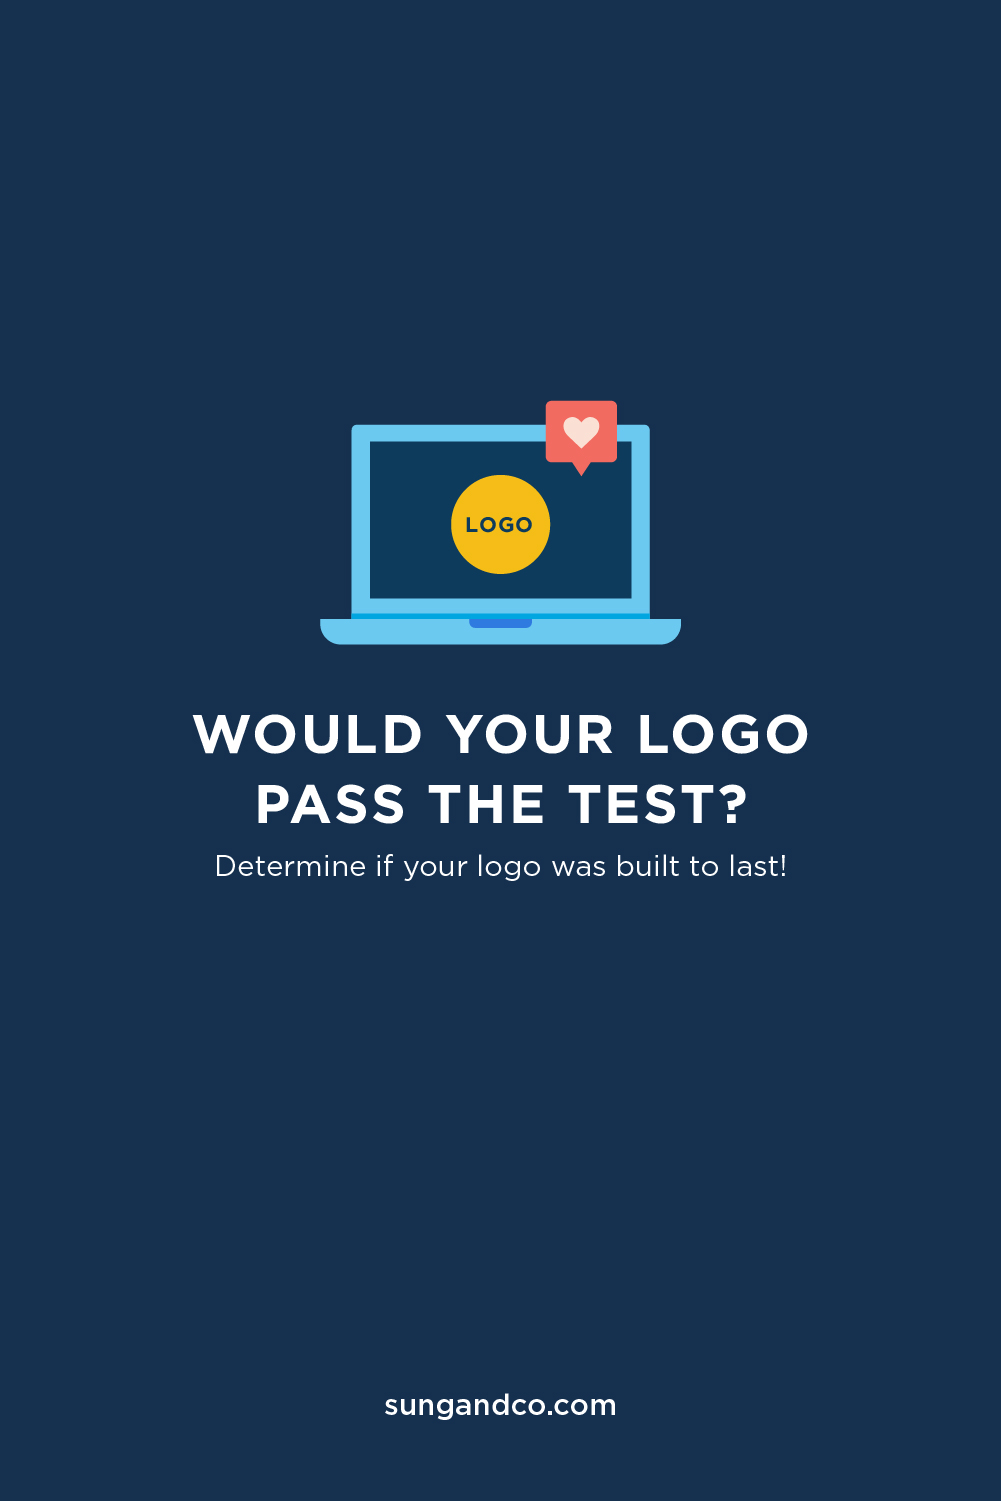 Would you logo pass the test? What makes a good logo? Find out here!